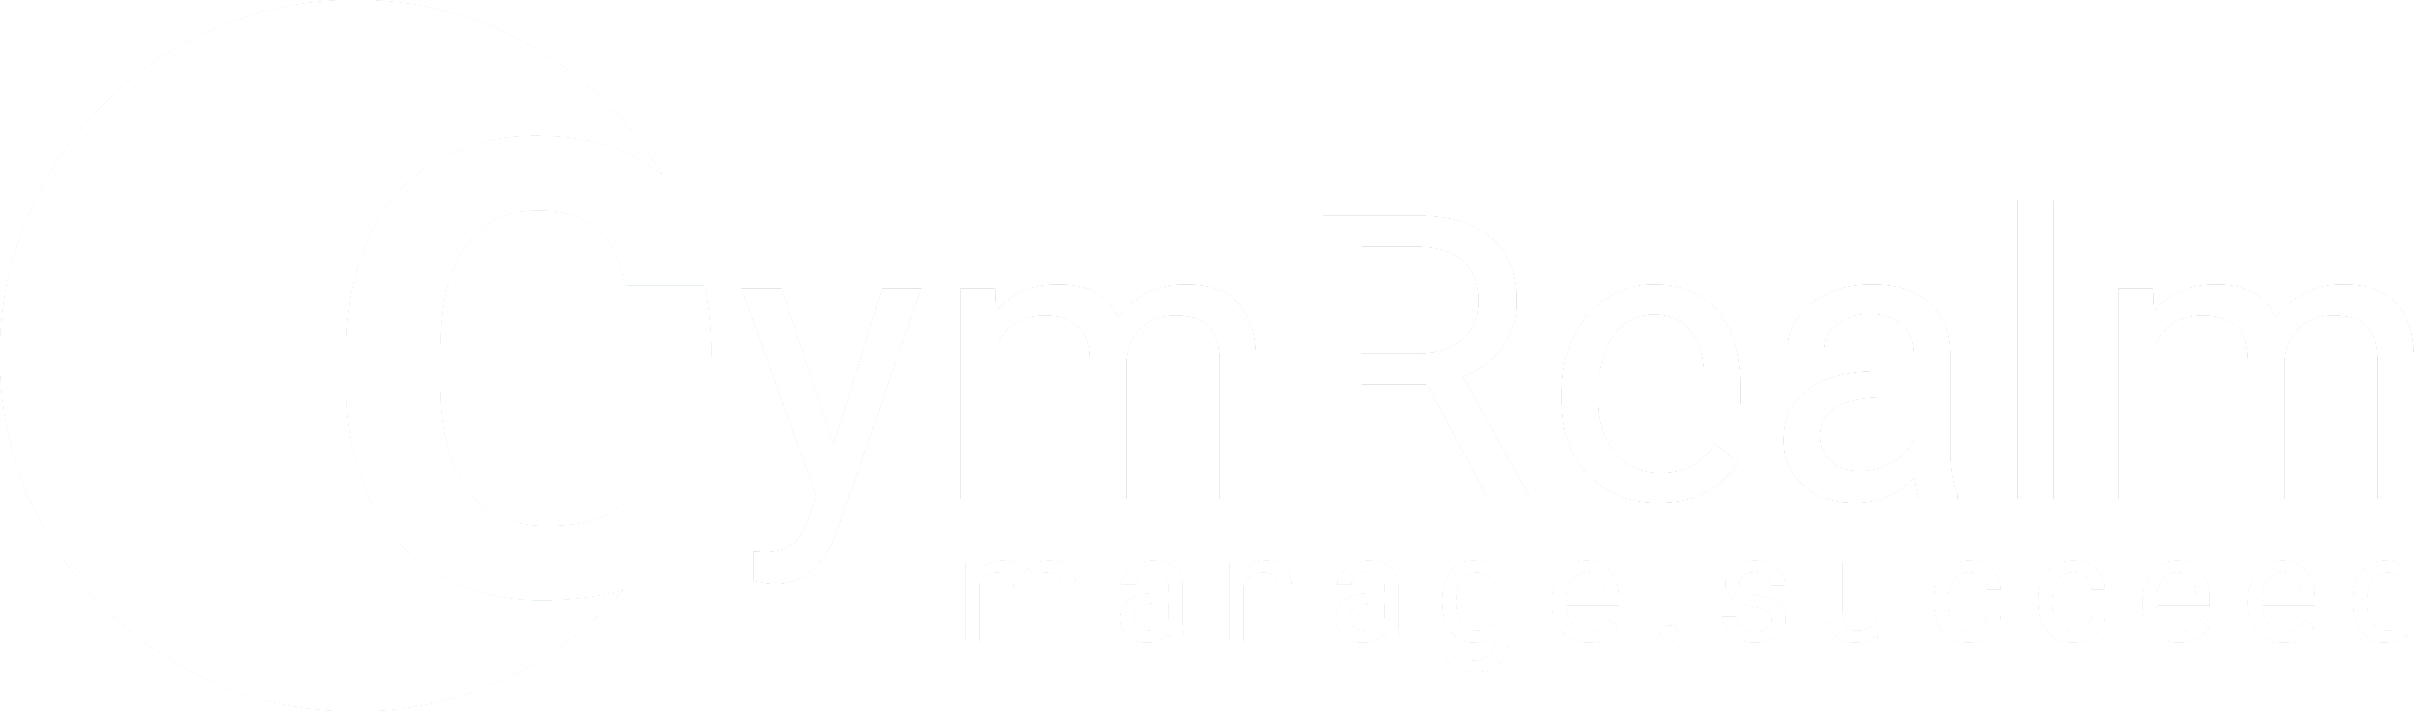 GymRealm Manager